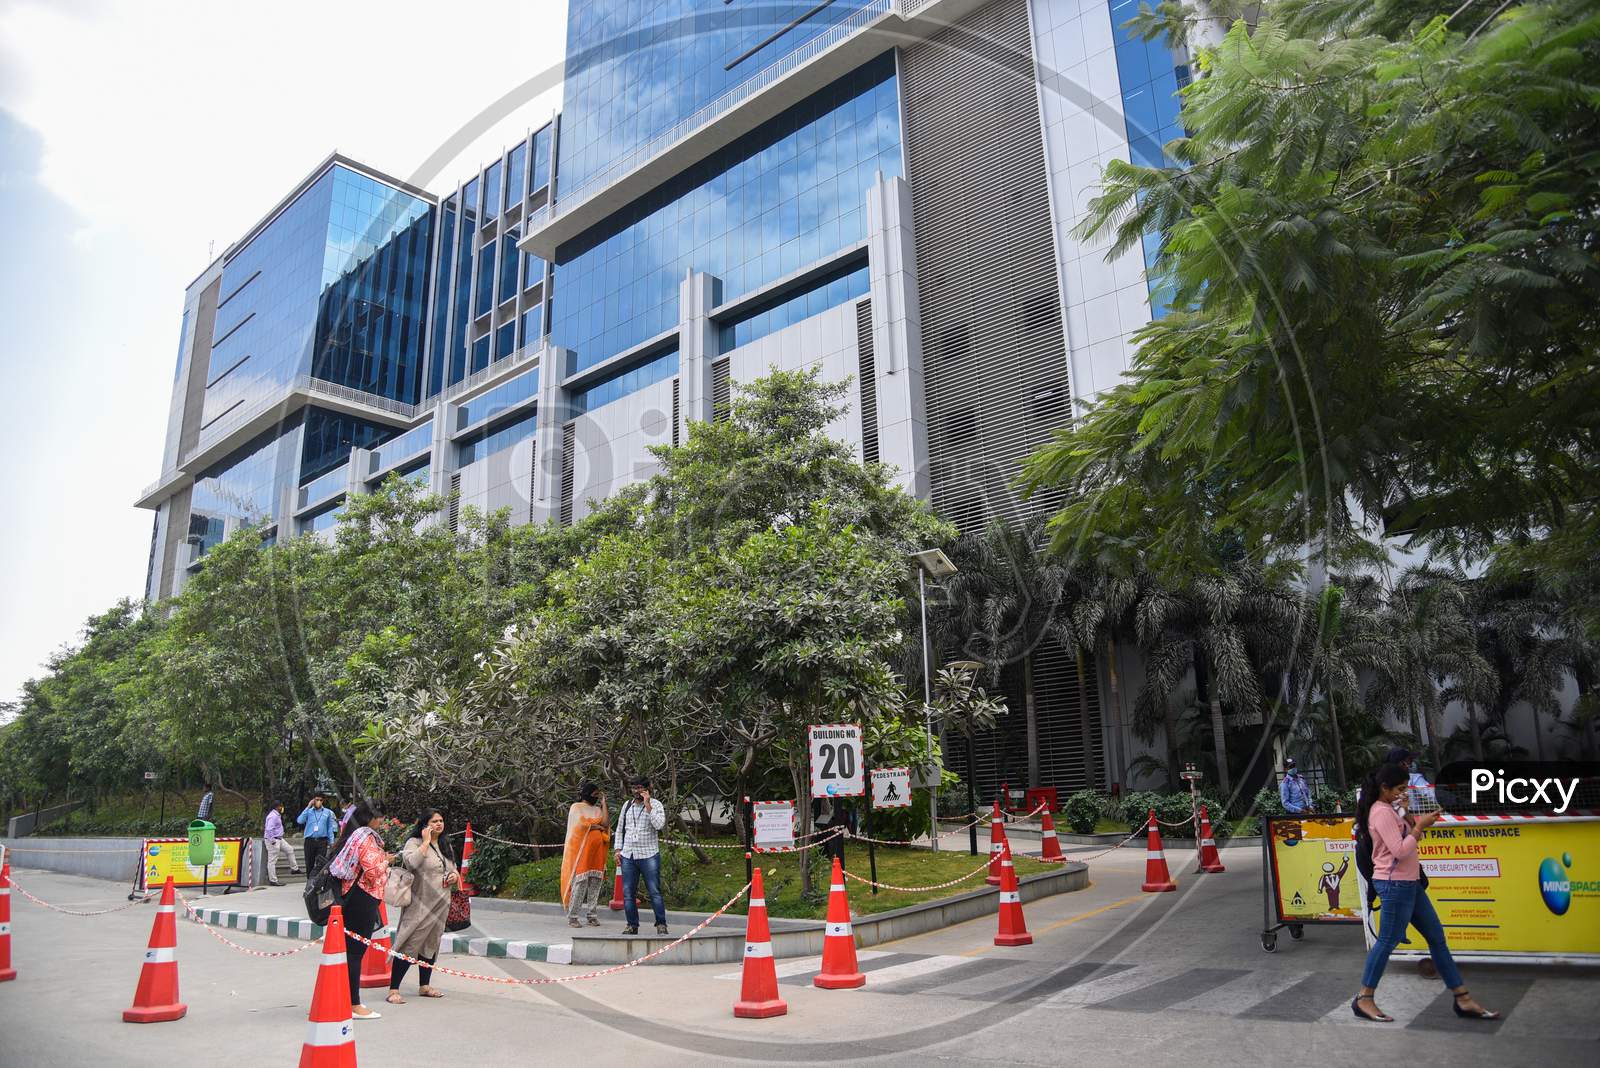 Raheja Mindspace Building no 20 being evacuated after a person from this building tested Positive from the CoVID19, Corona Virus